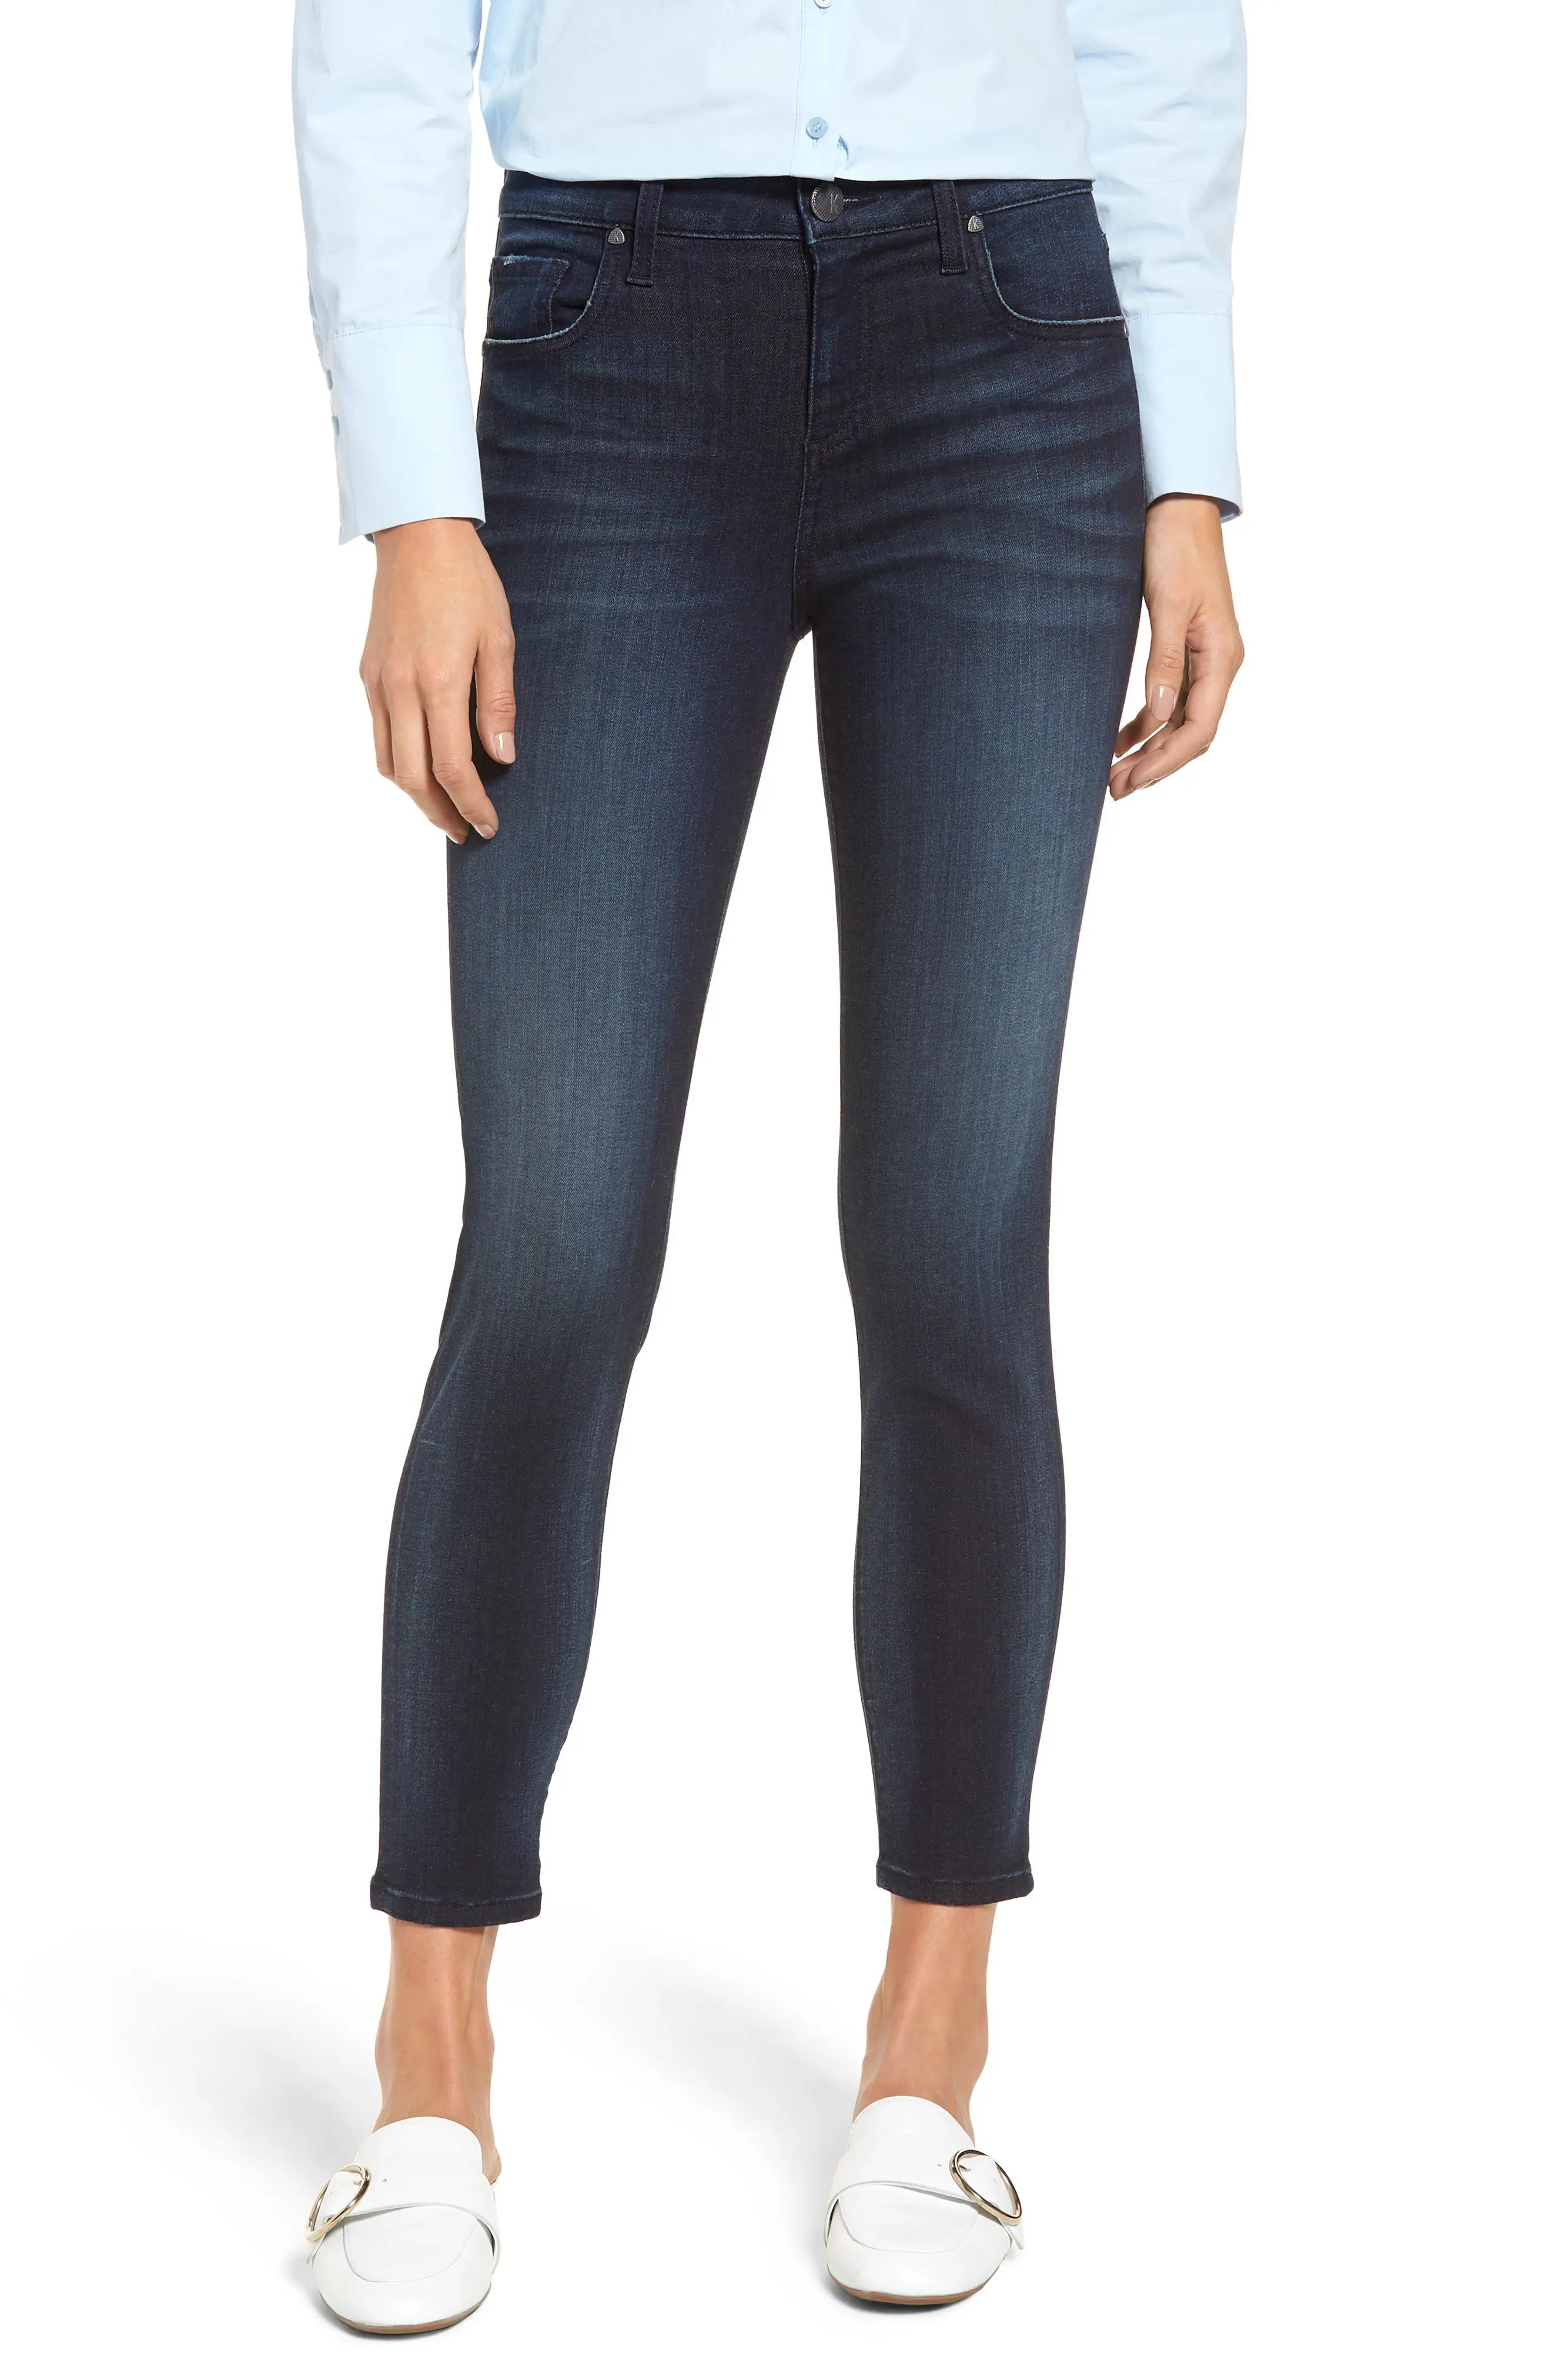 Kut from the Kloth Donna High Waist Skinny Ankle Jeans (Formidable) (Regular & Petite) | Nordstrom